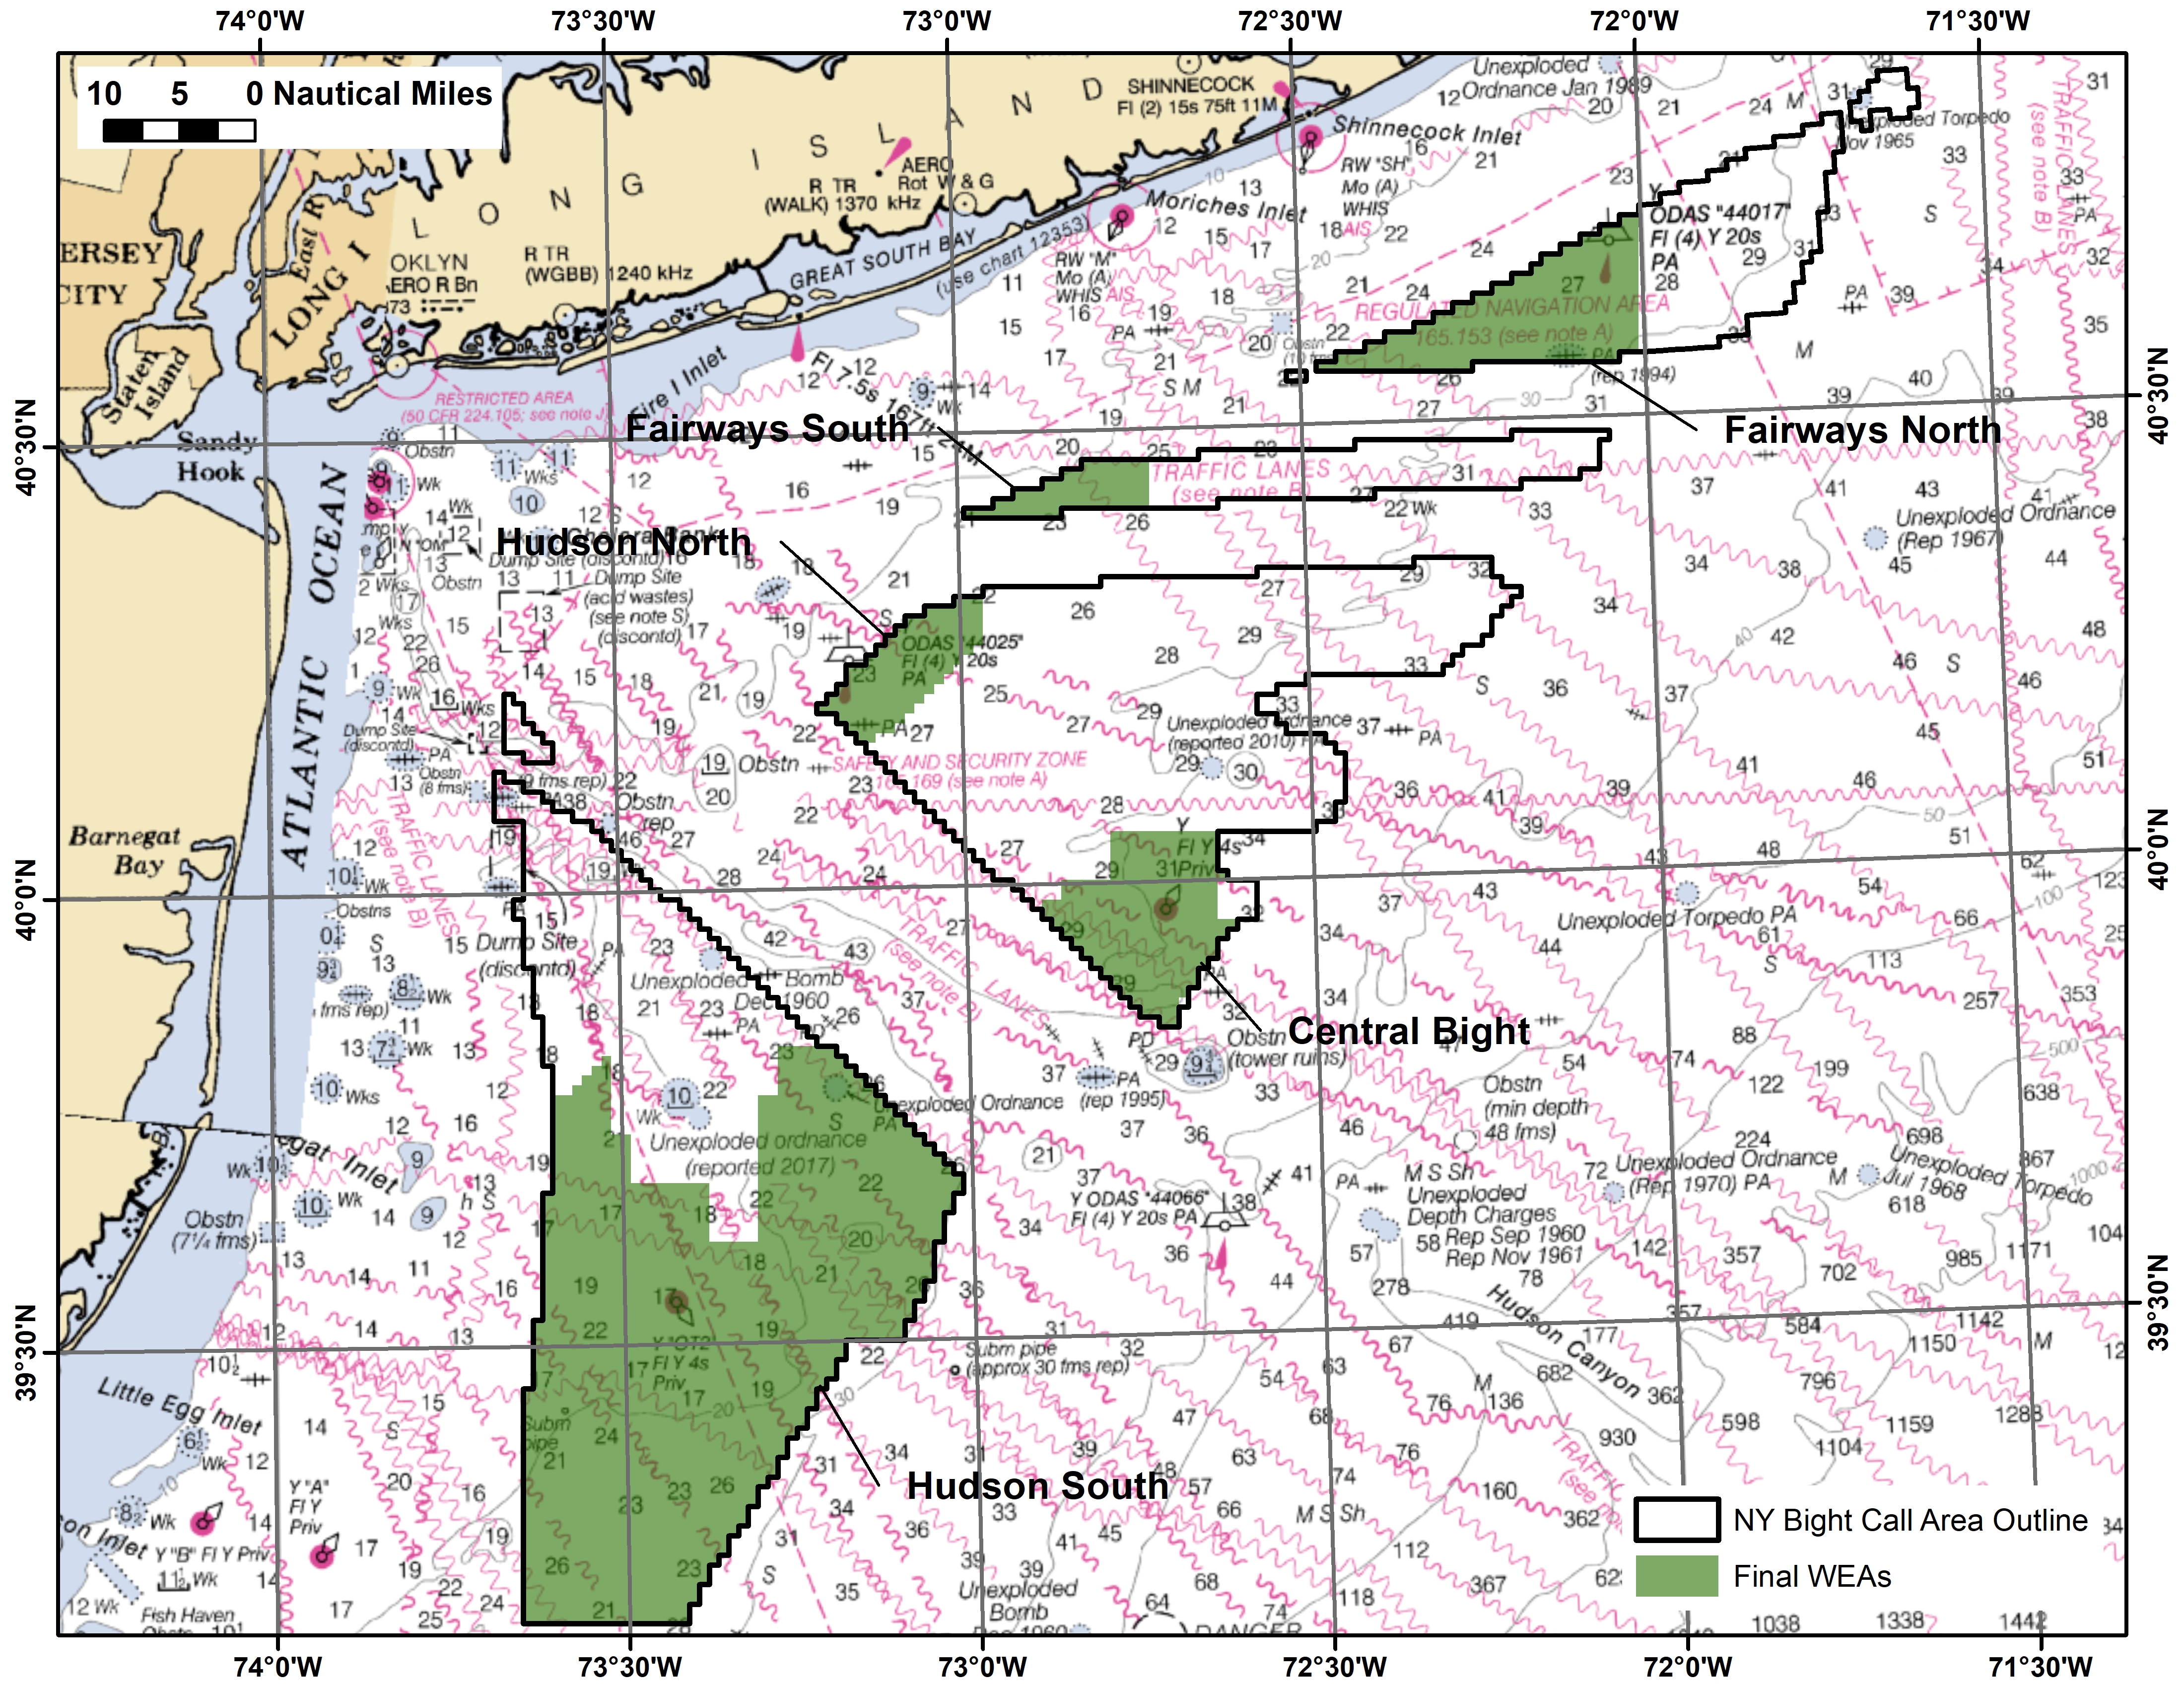 US Identifies New Offshore Wind Areas in New York Bight